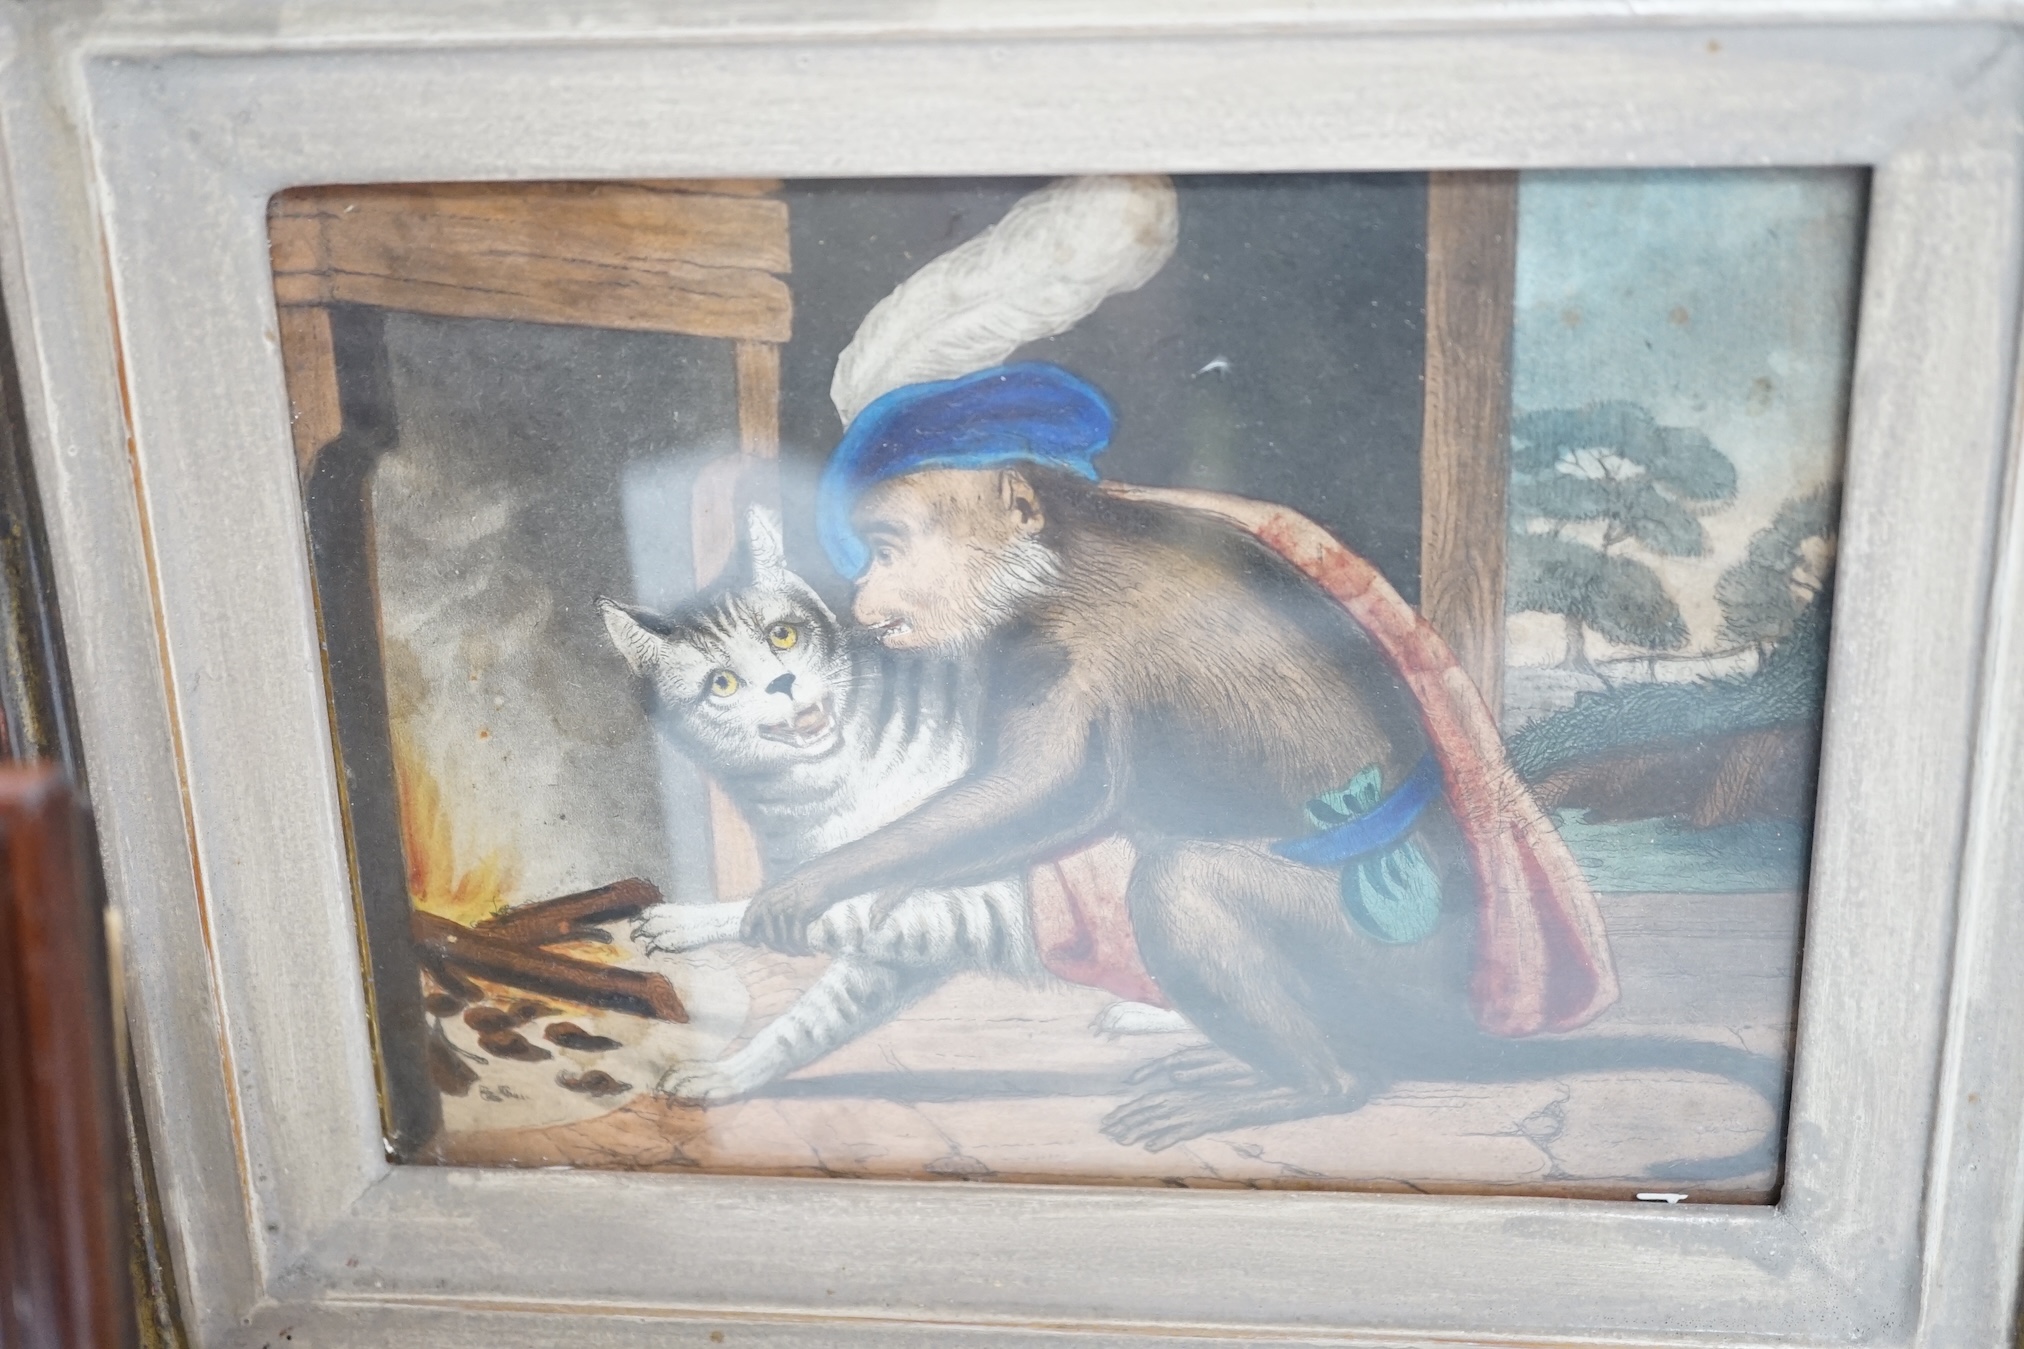 From the Studio of Fred Cuming. Two 19th century colour prints, Monkey and Chinese drummer, largest 11 x 15cm. Condition - fair